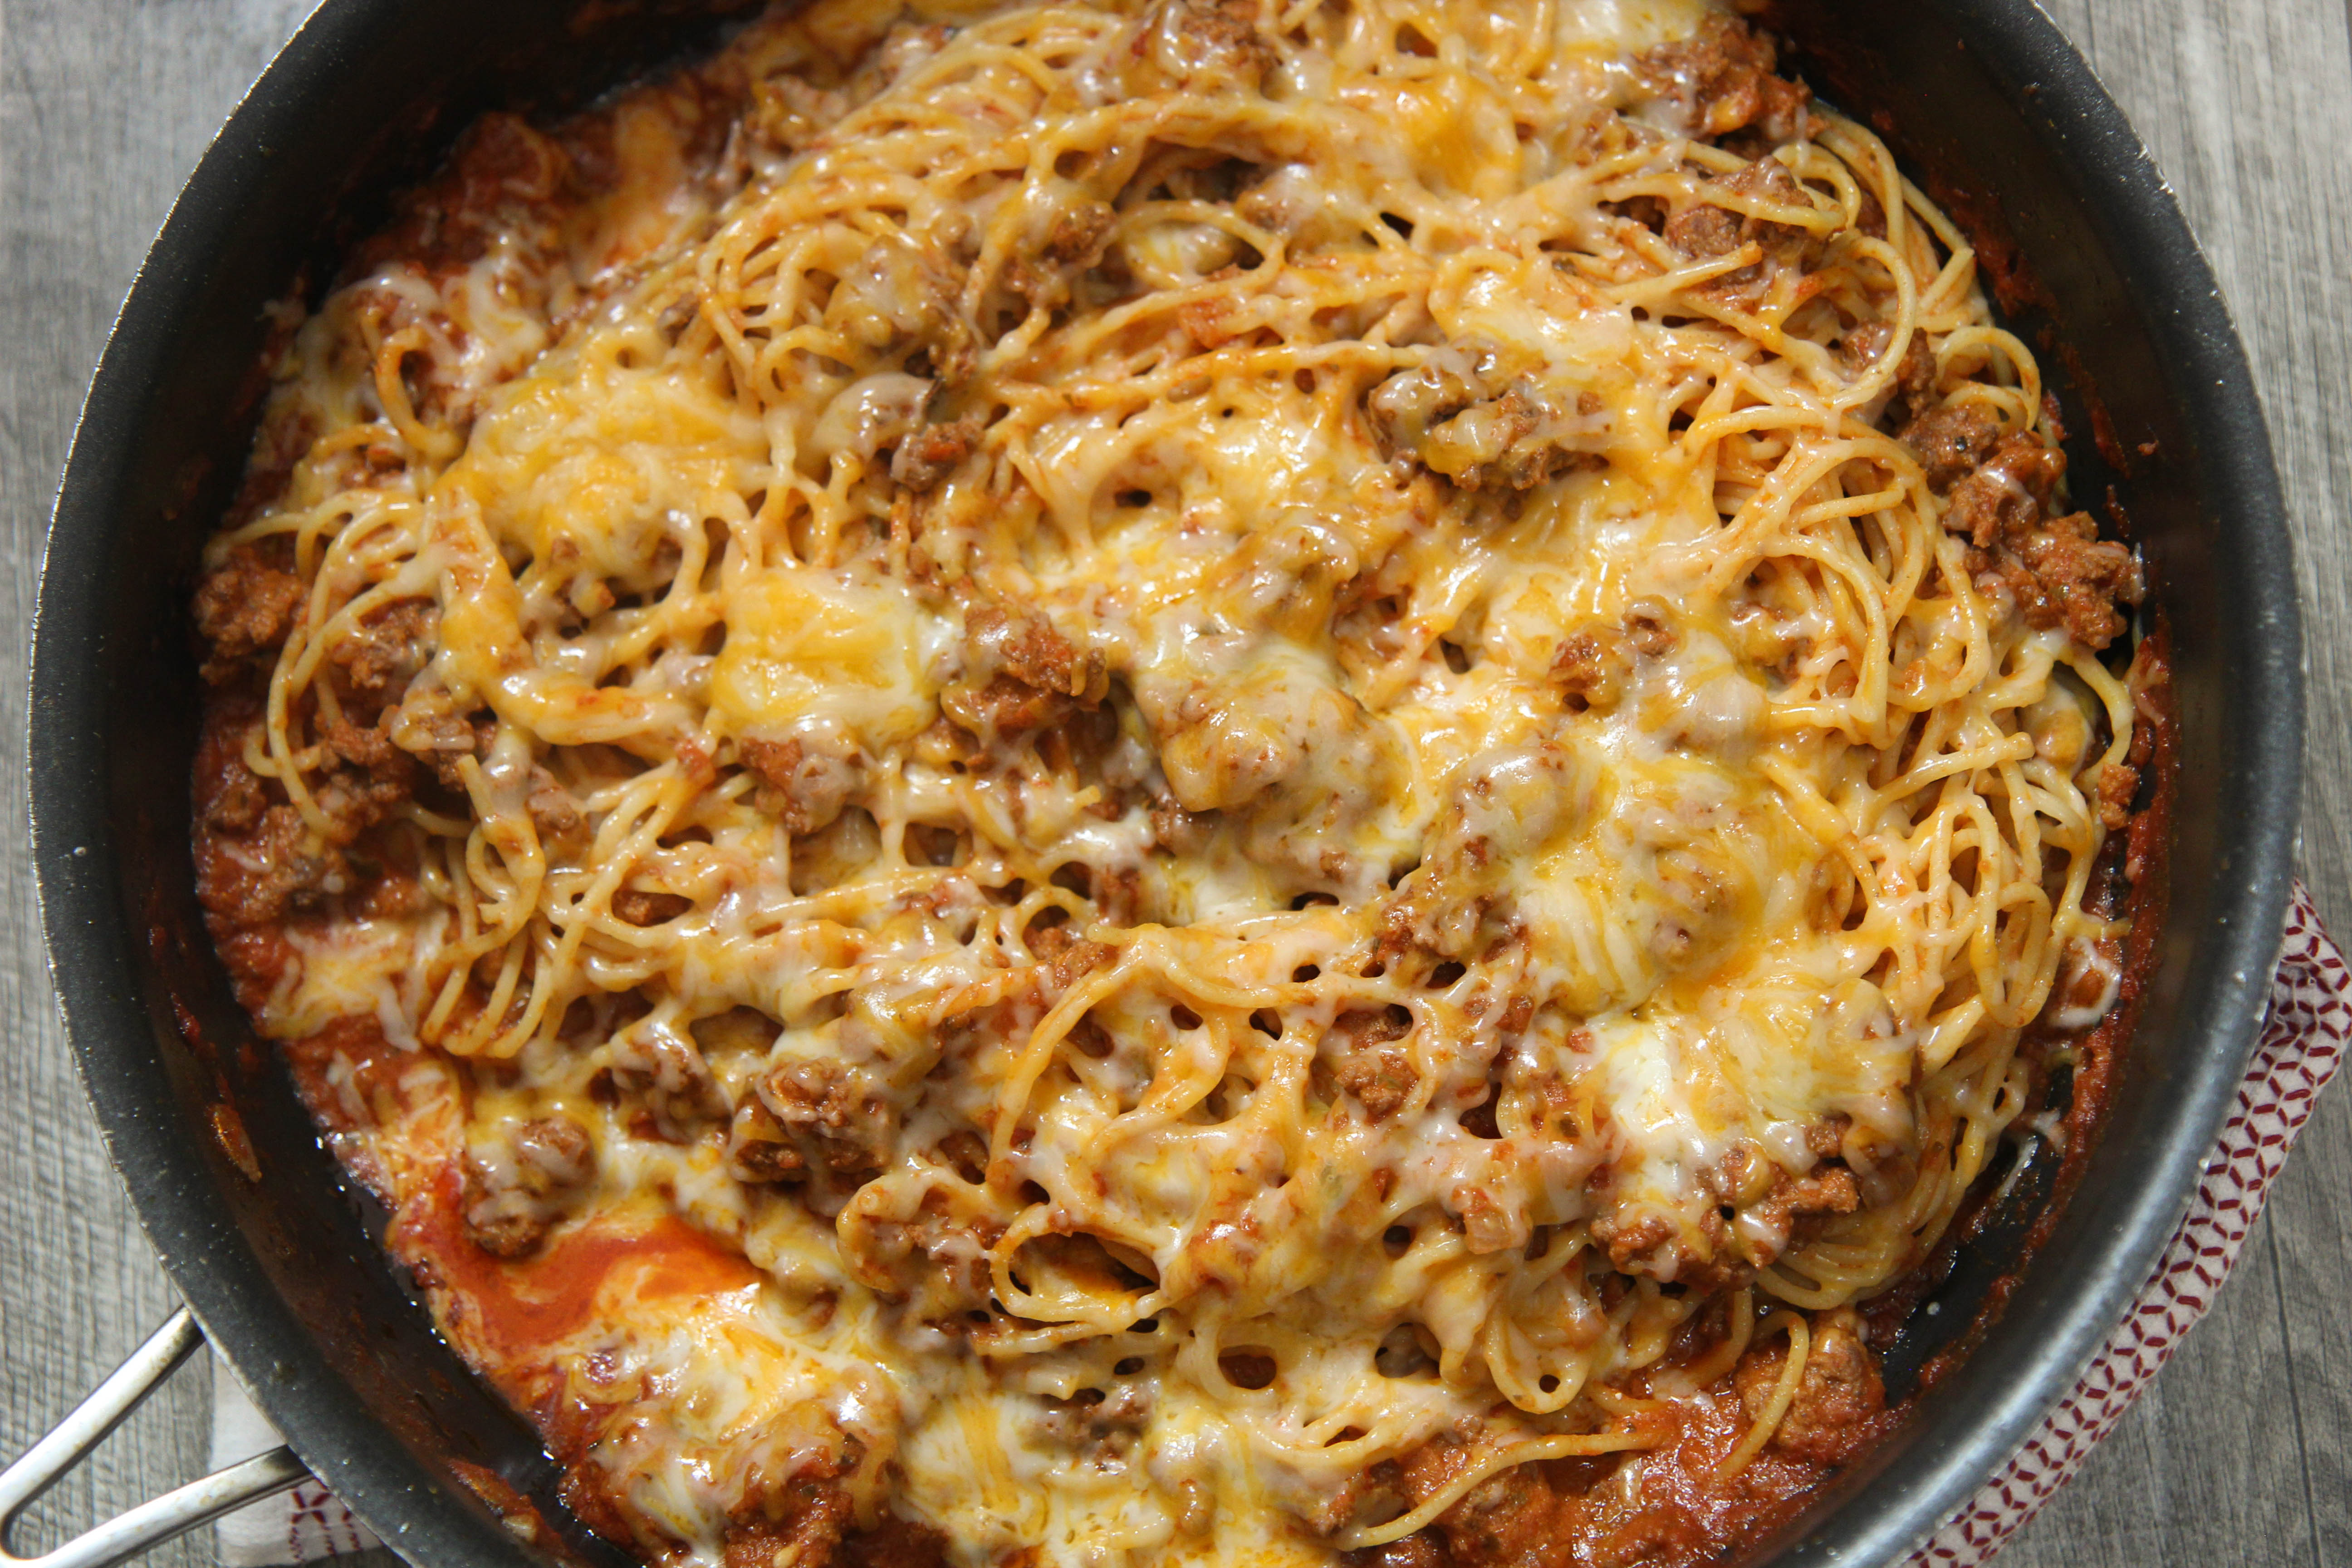 Cooked By Julie's taco spaghetti made with Barillo sauce and pasta is the perfect dish for a family dinner or cold winter night!